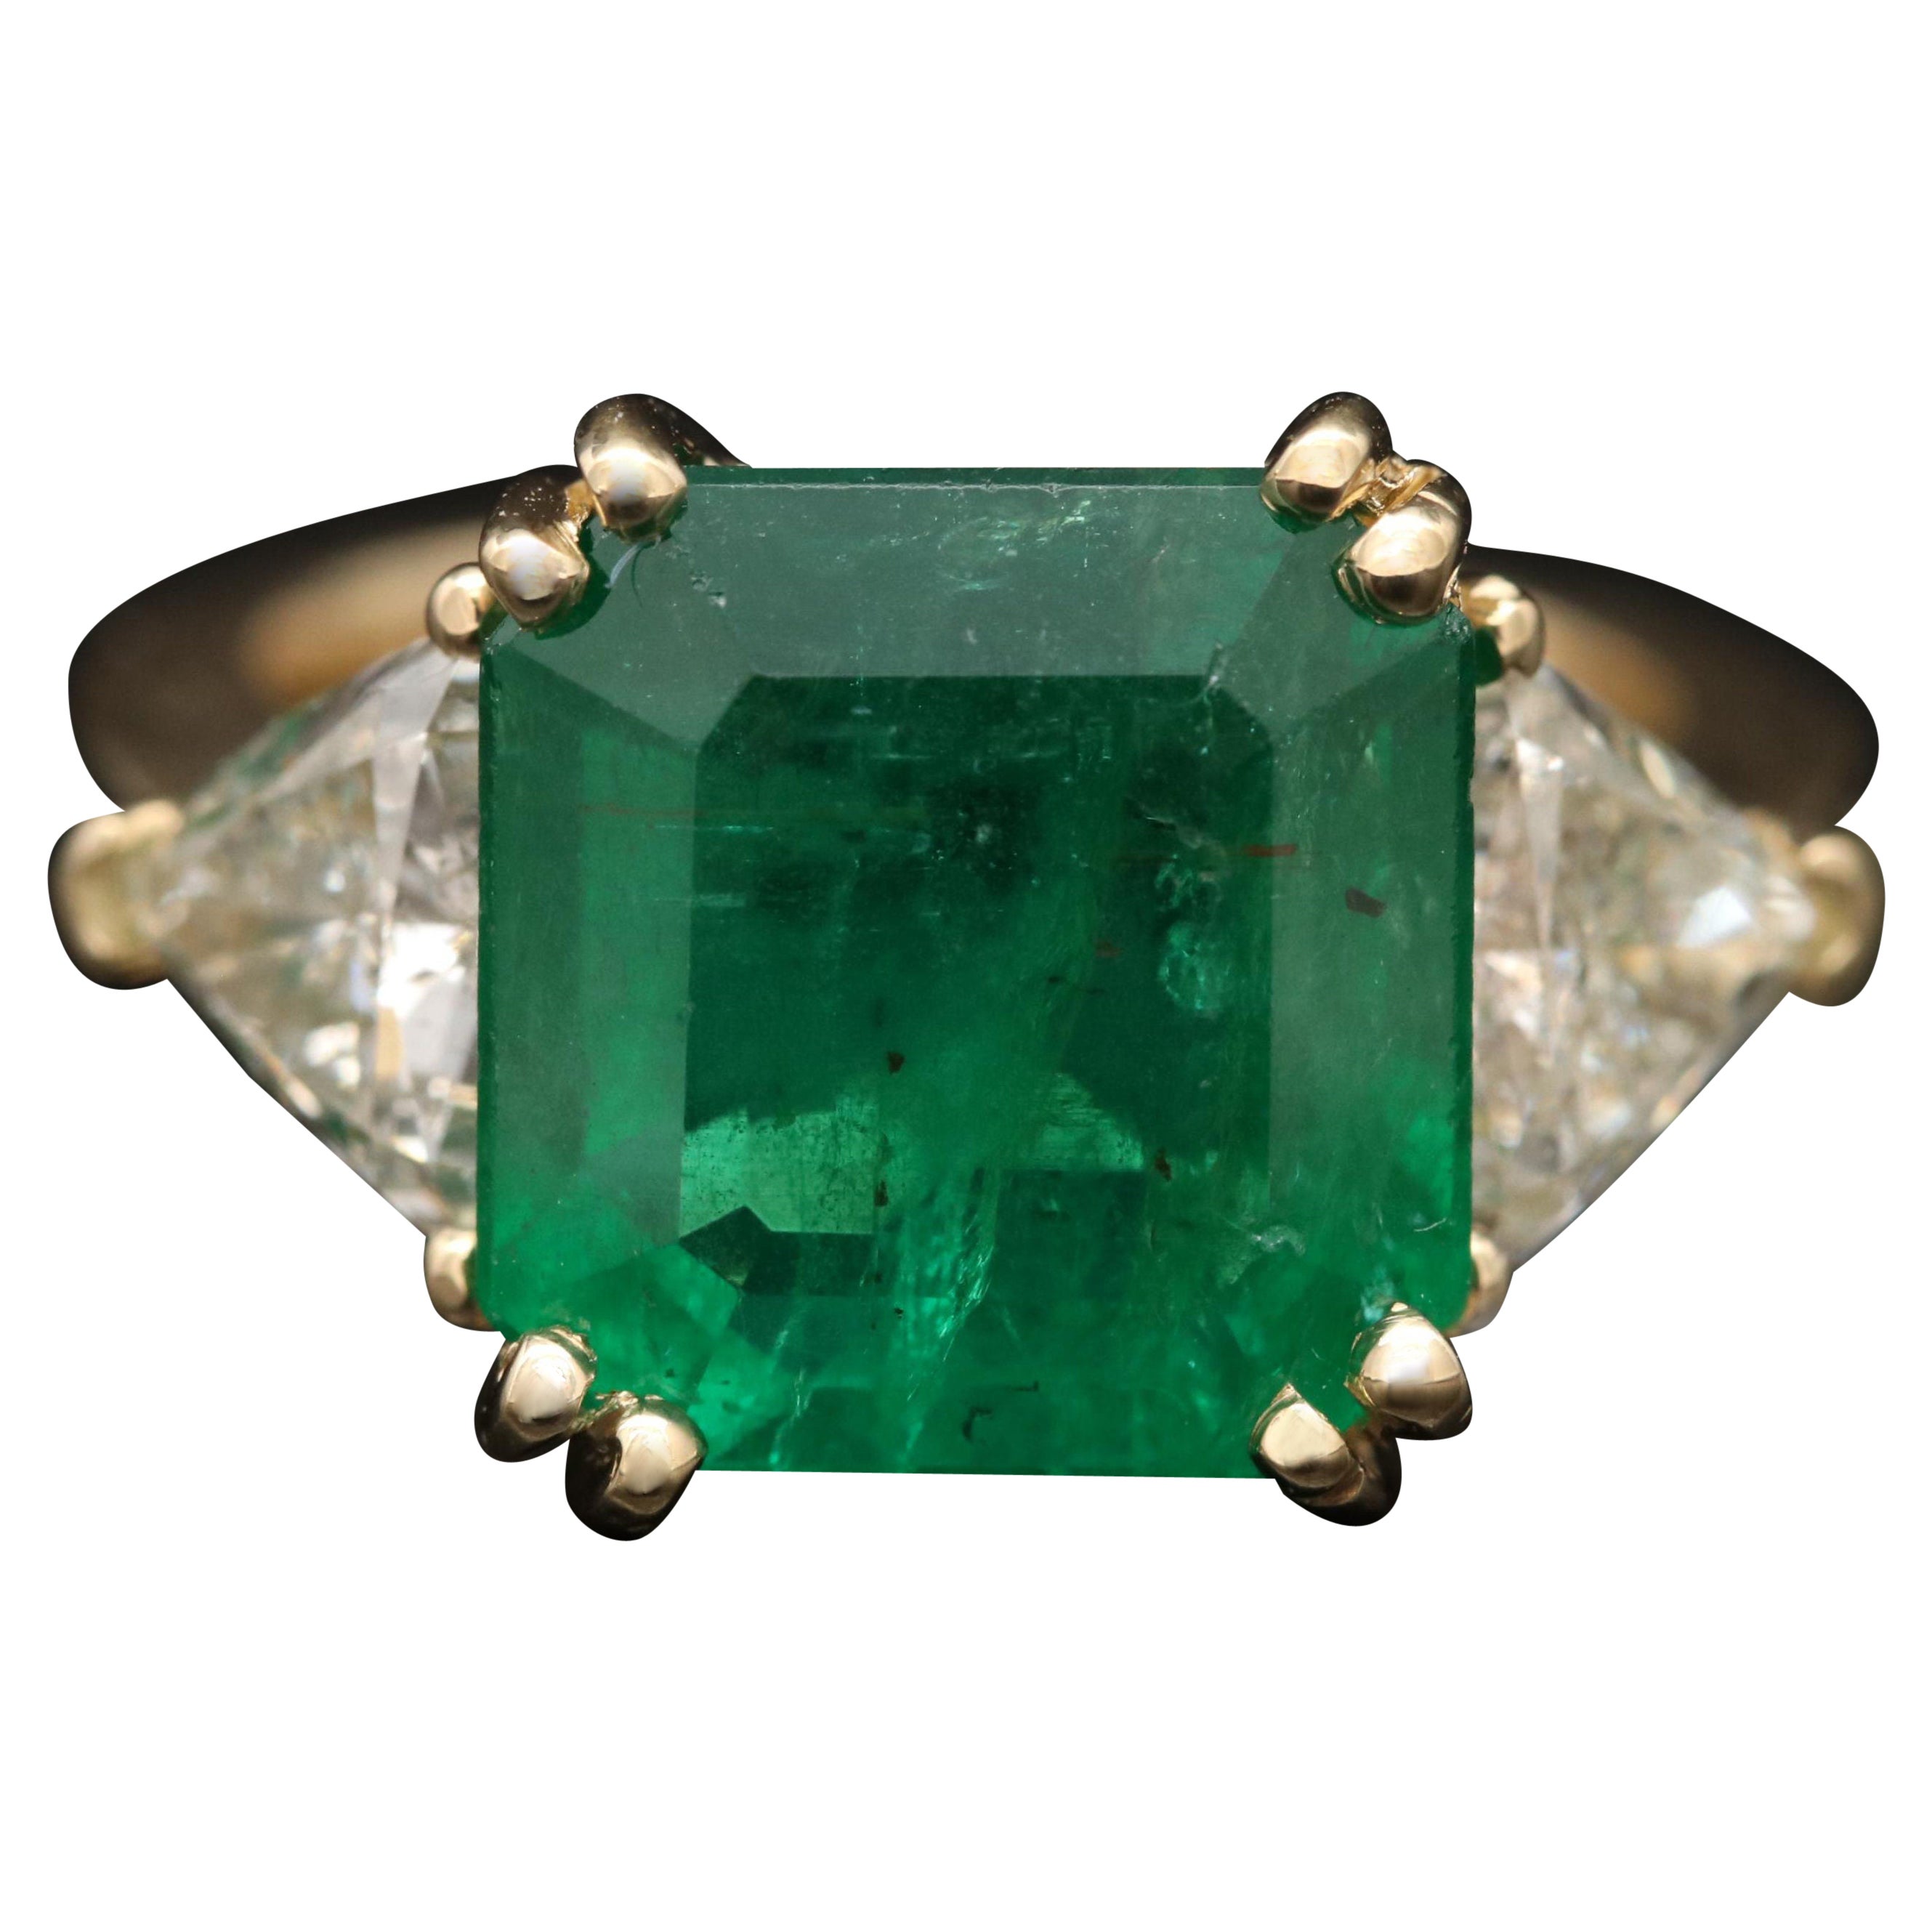 For Sale:  5 Carat Three Stone Emerald Diamond Engagement Ring Antique Bridal Cocktail Ring